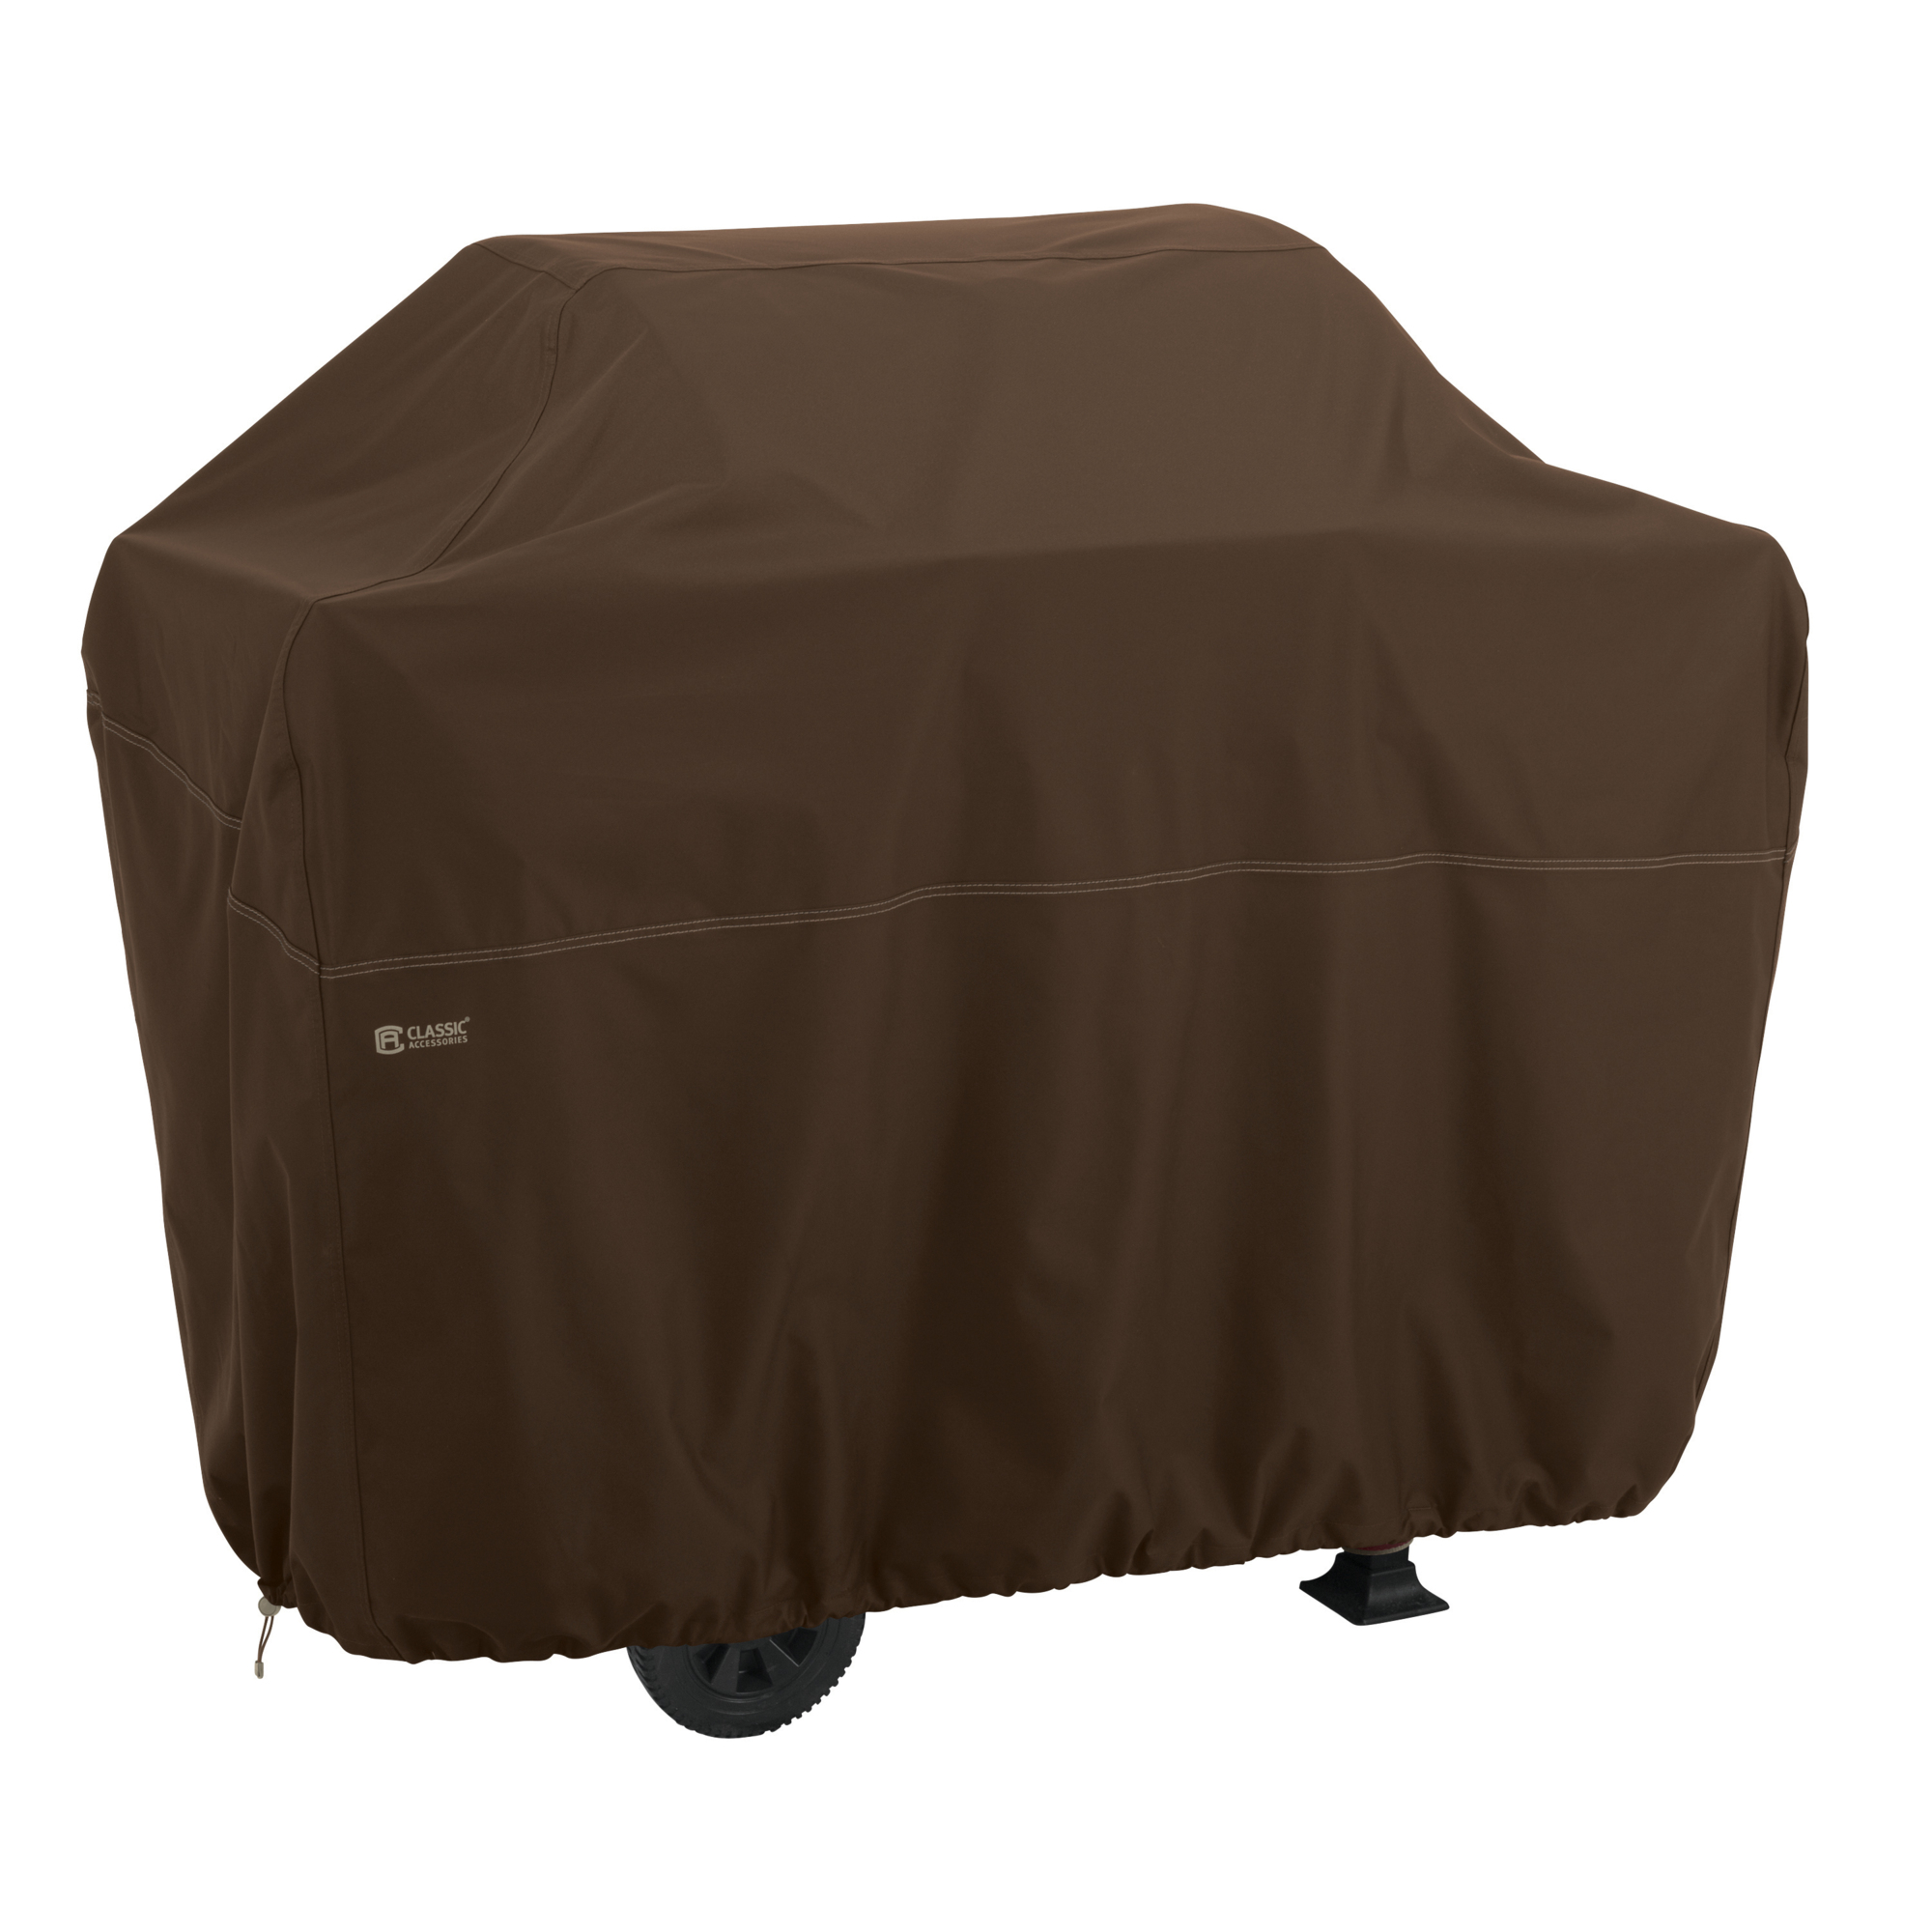 Classic Accessories Madrona BBQ Grill Cover, L, Brown, Polyester, Model 55-726-046601-RT